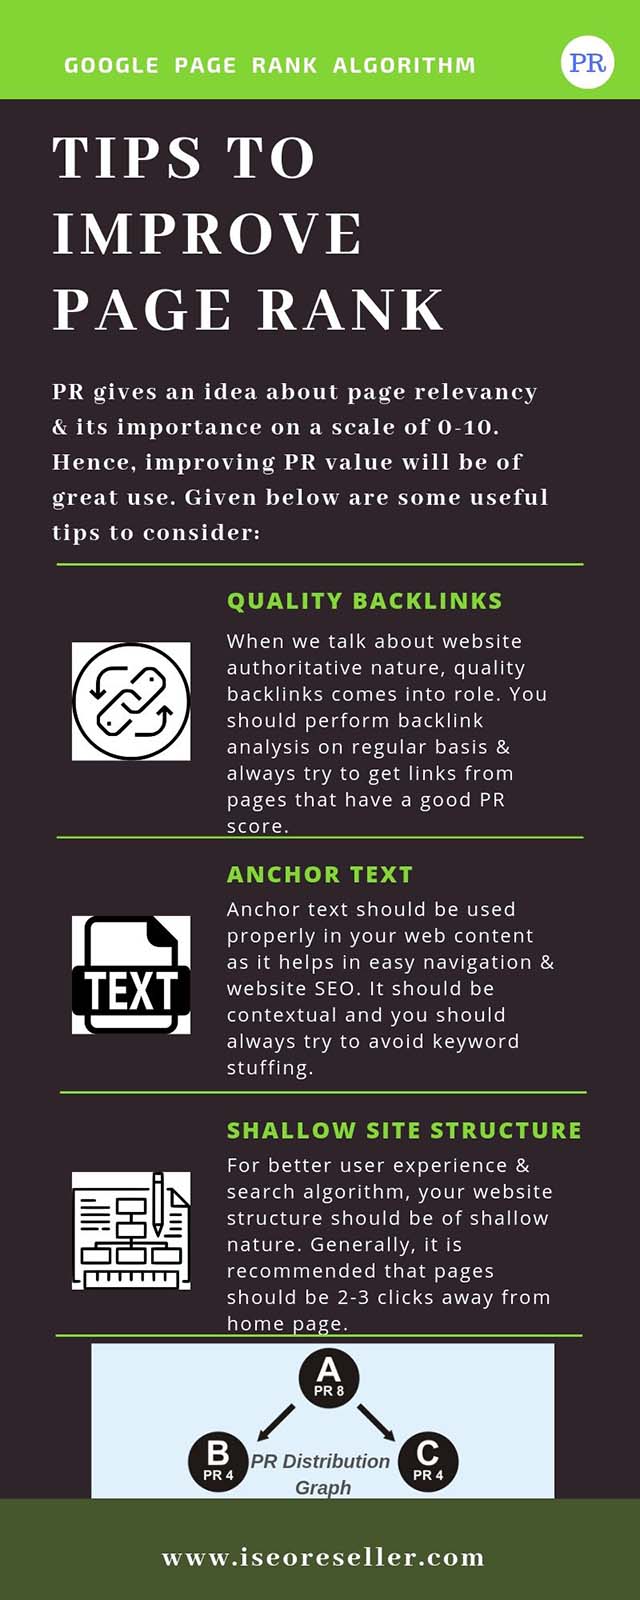 tips-to-improve-page-rank-infographic